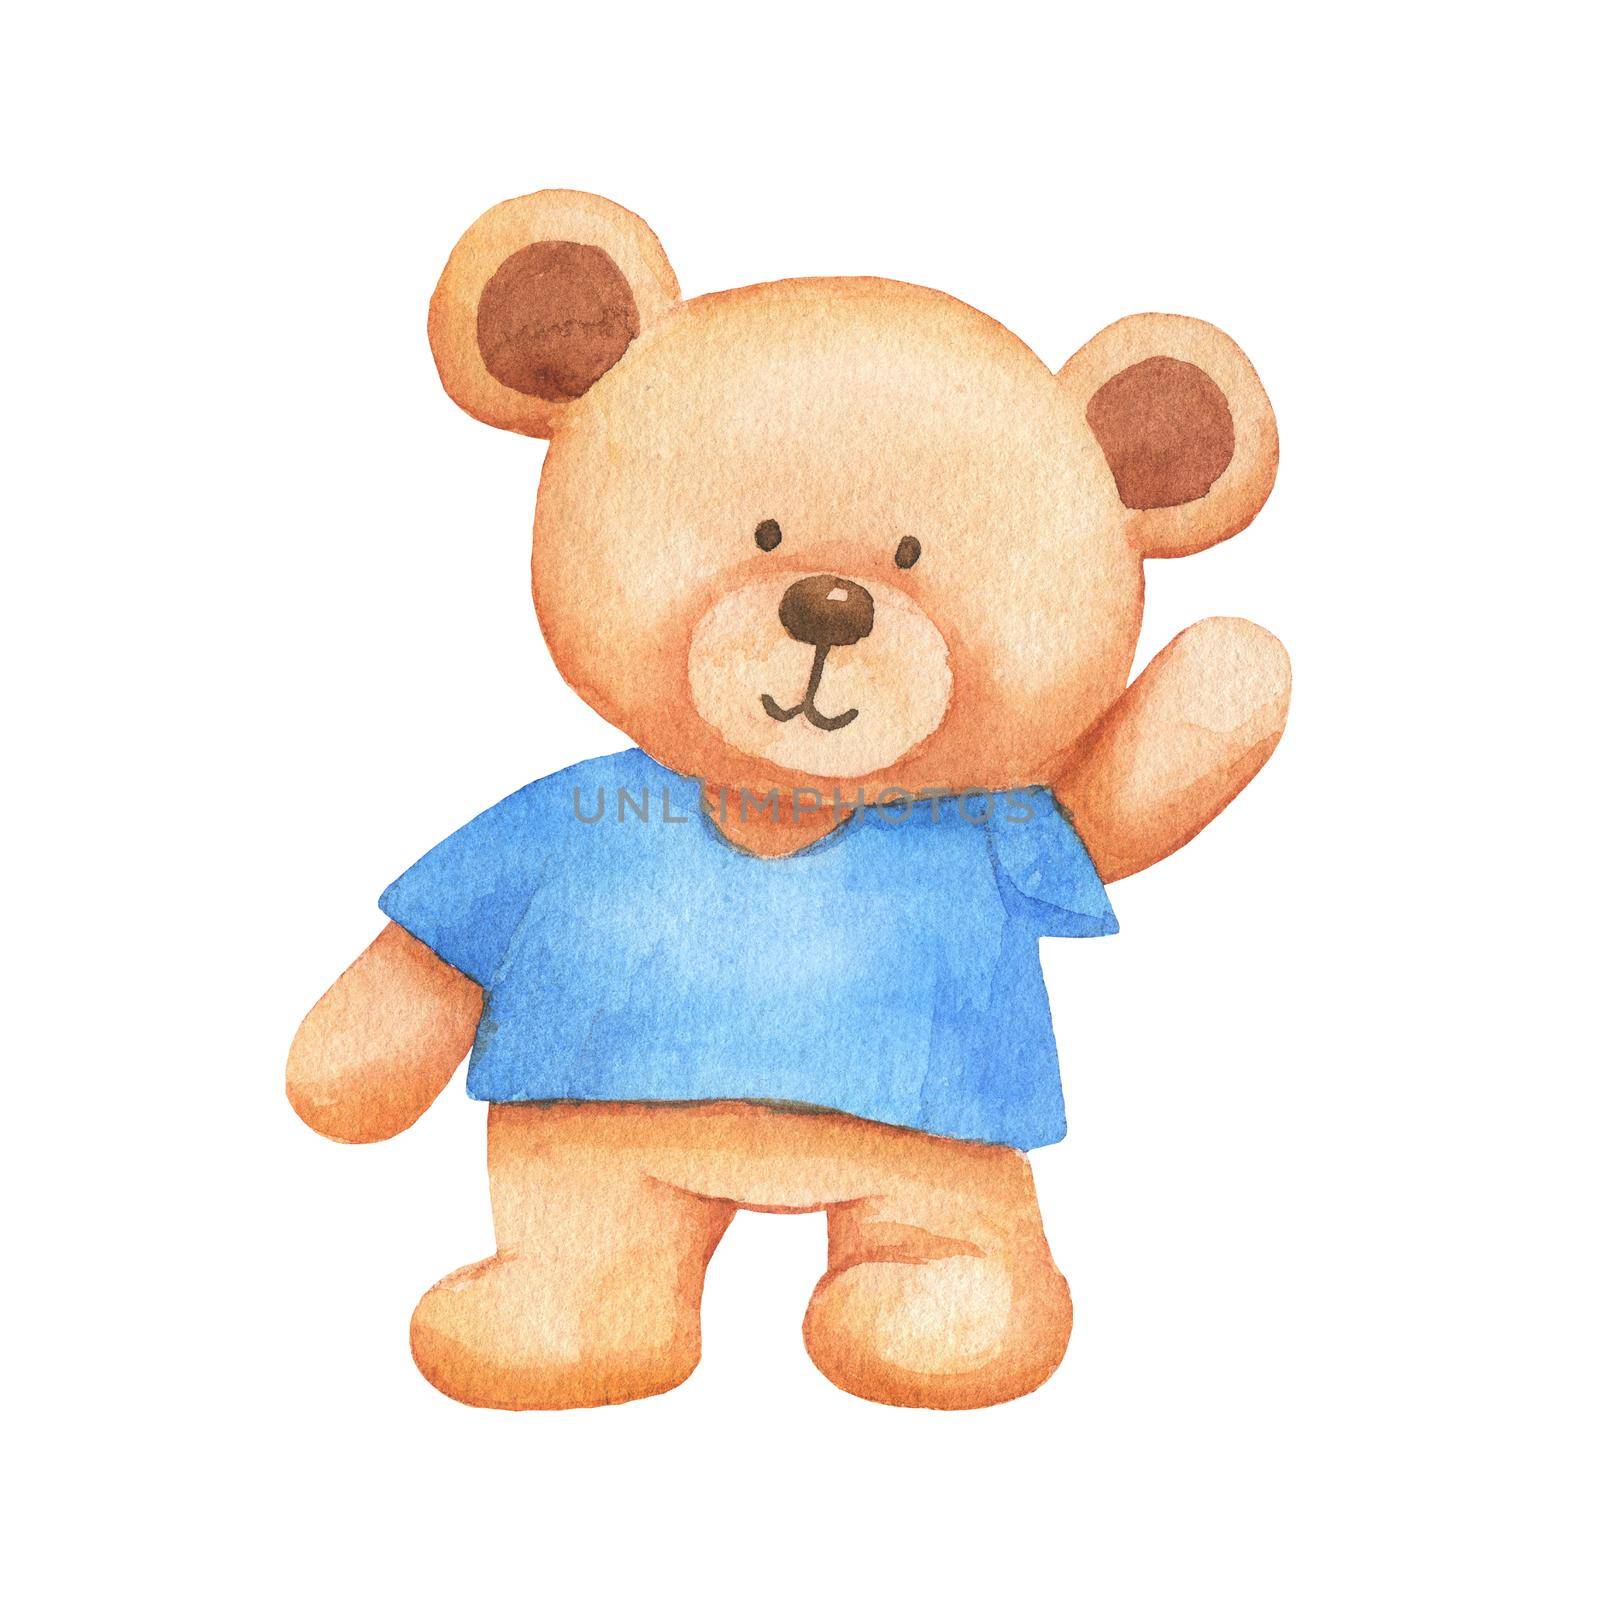 Watercolor cute bear toy in blue T-shirt. Hand drawn illustration isolated on white by ElenaPlatova